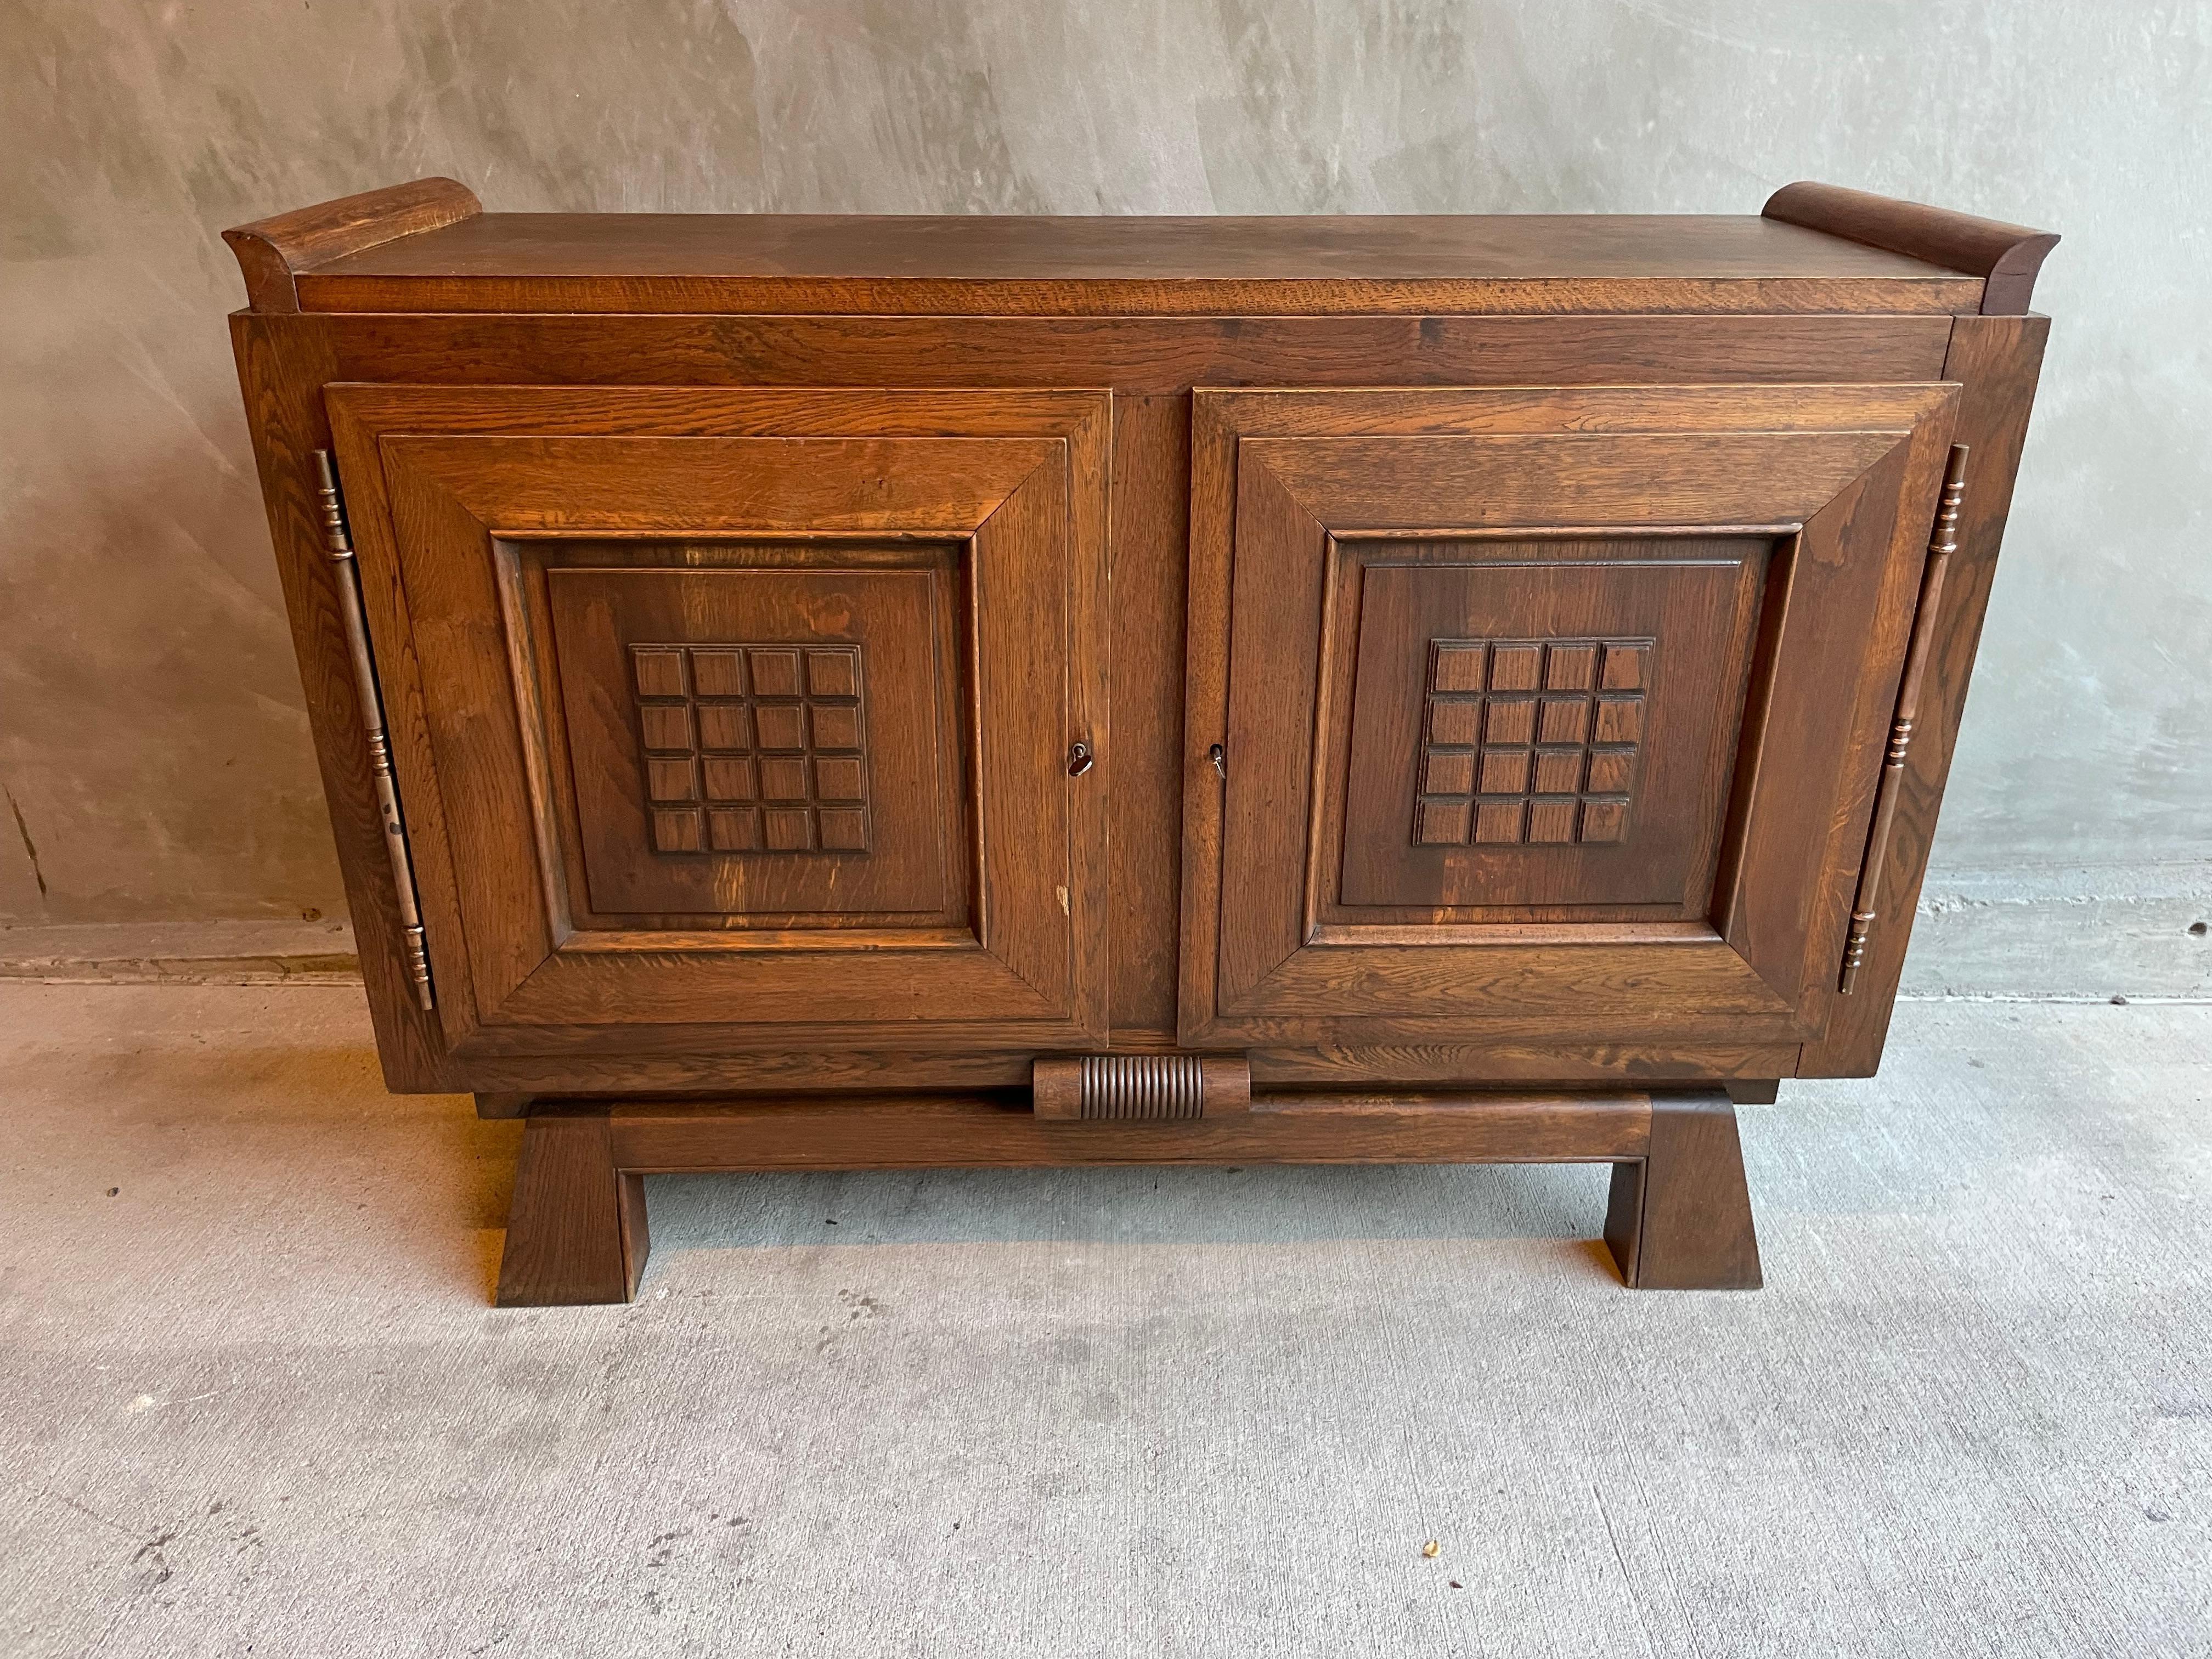 Two door Brutalist Art Deco era oak sideboard by Charles Dudouyt in all original condition. Solid oak construction throughout with lathe turned elongated copper hinges contrasted by geometrical motifs on the frame and panel door fronts. Interior has